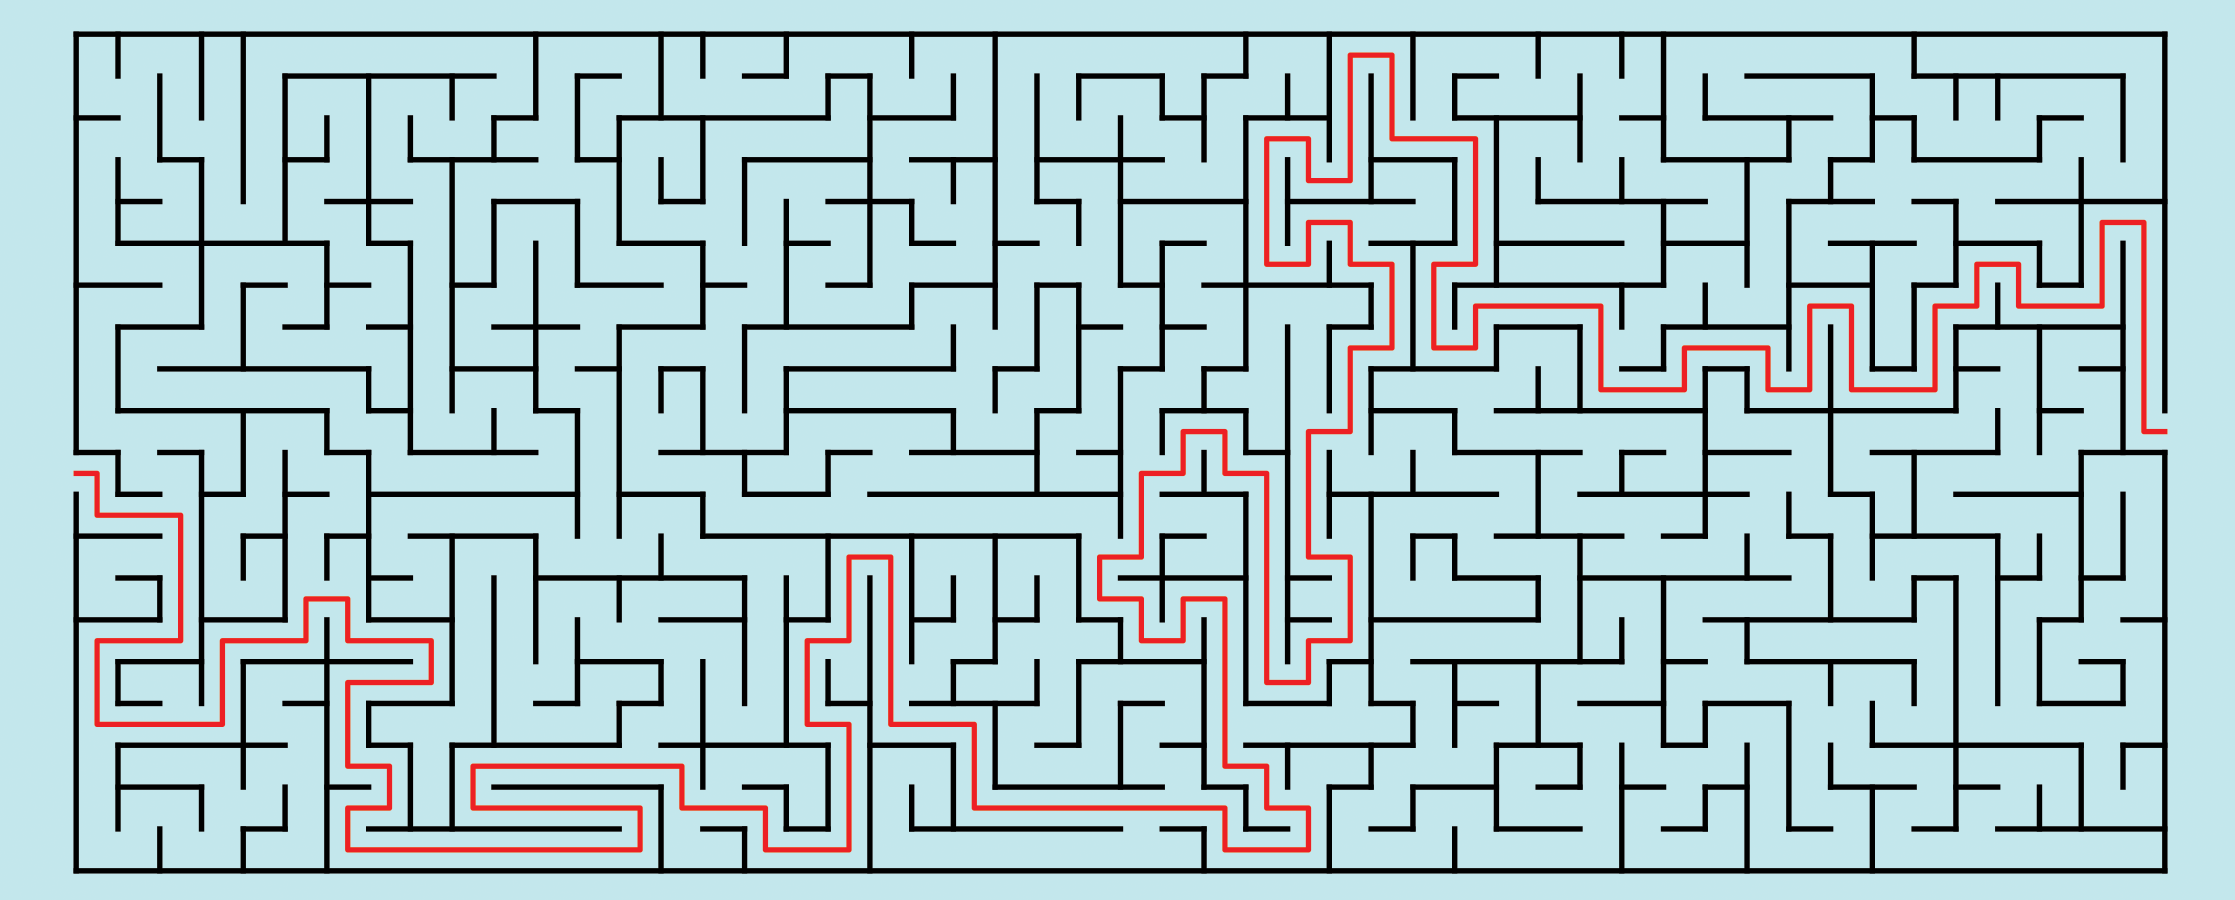 July 30th Maze Solution